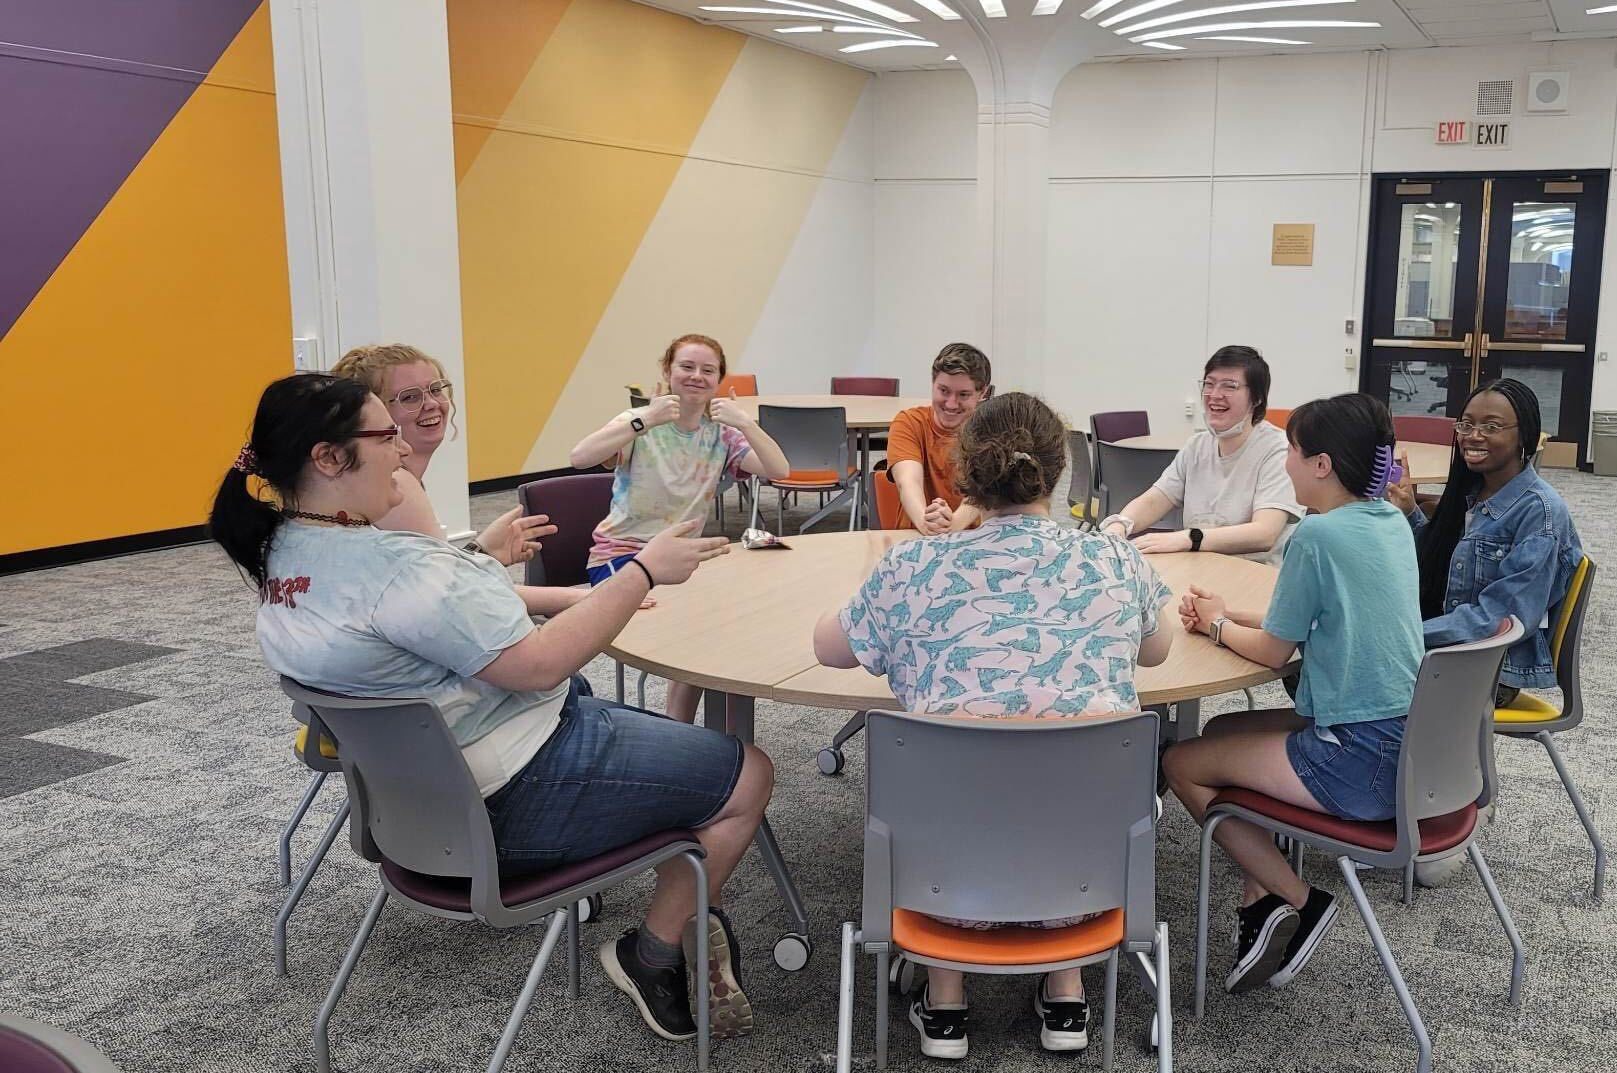 Students laughing and smiling around a circular table in the Minerva room.